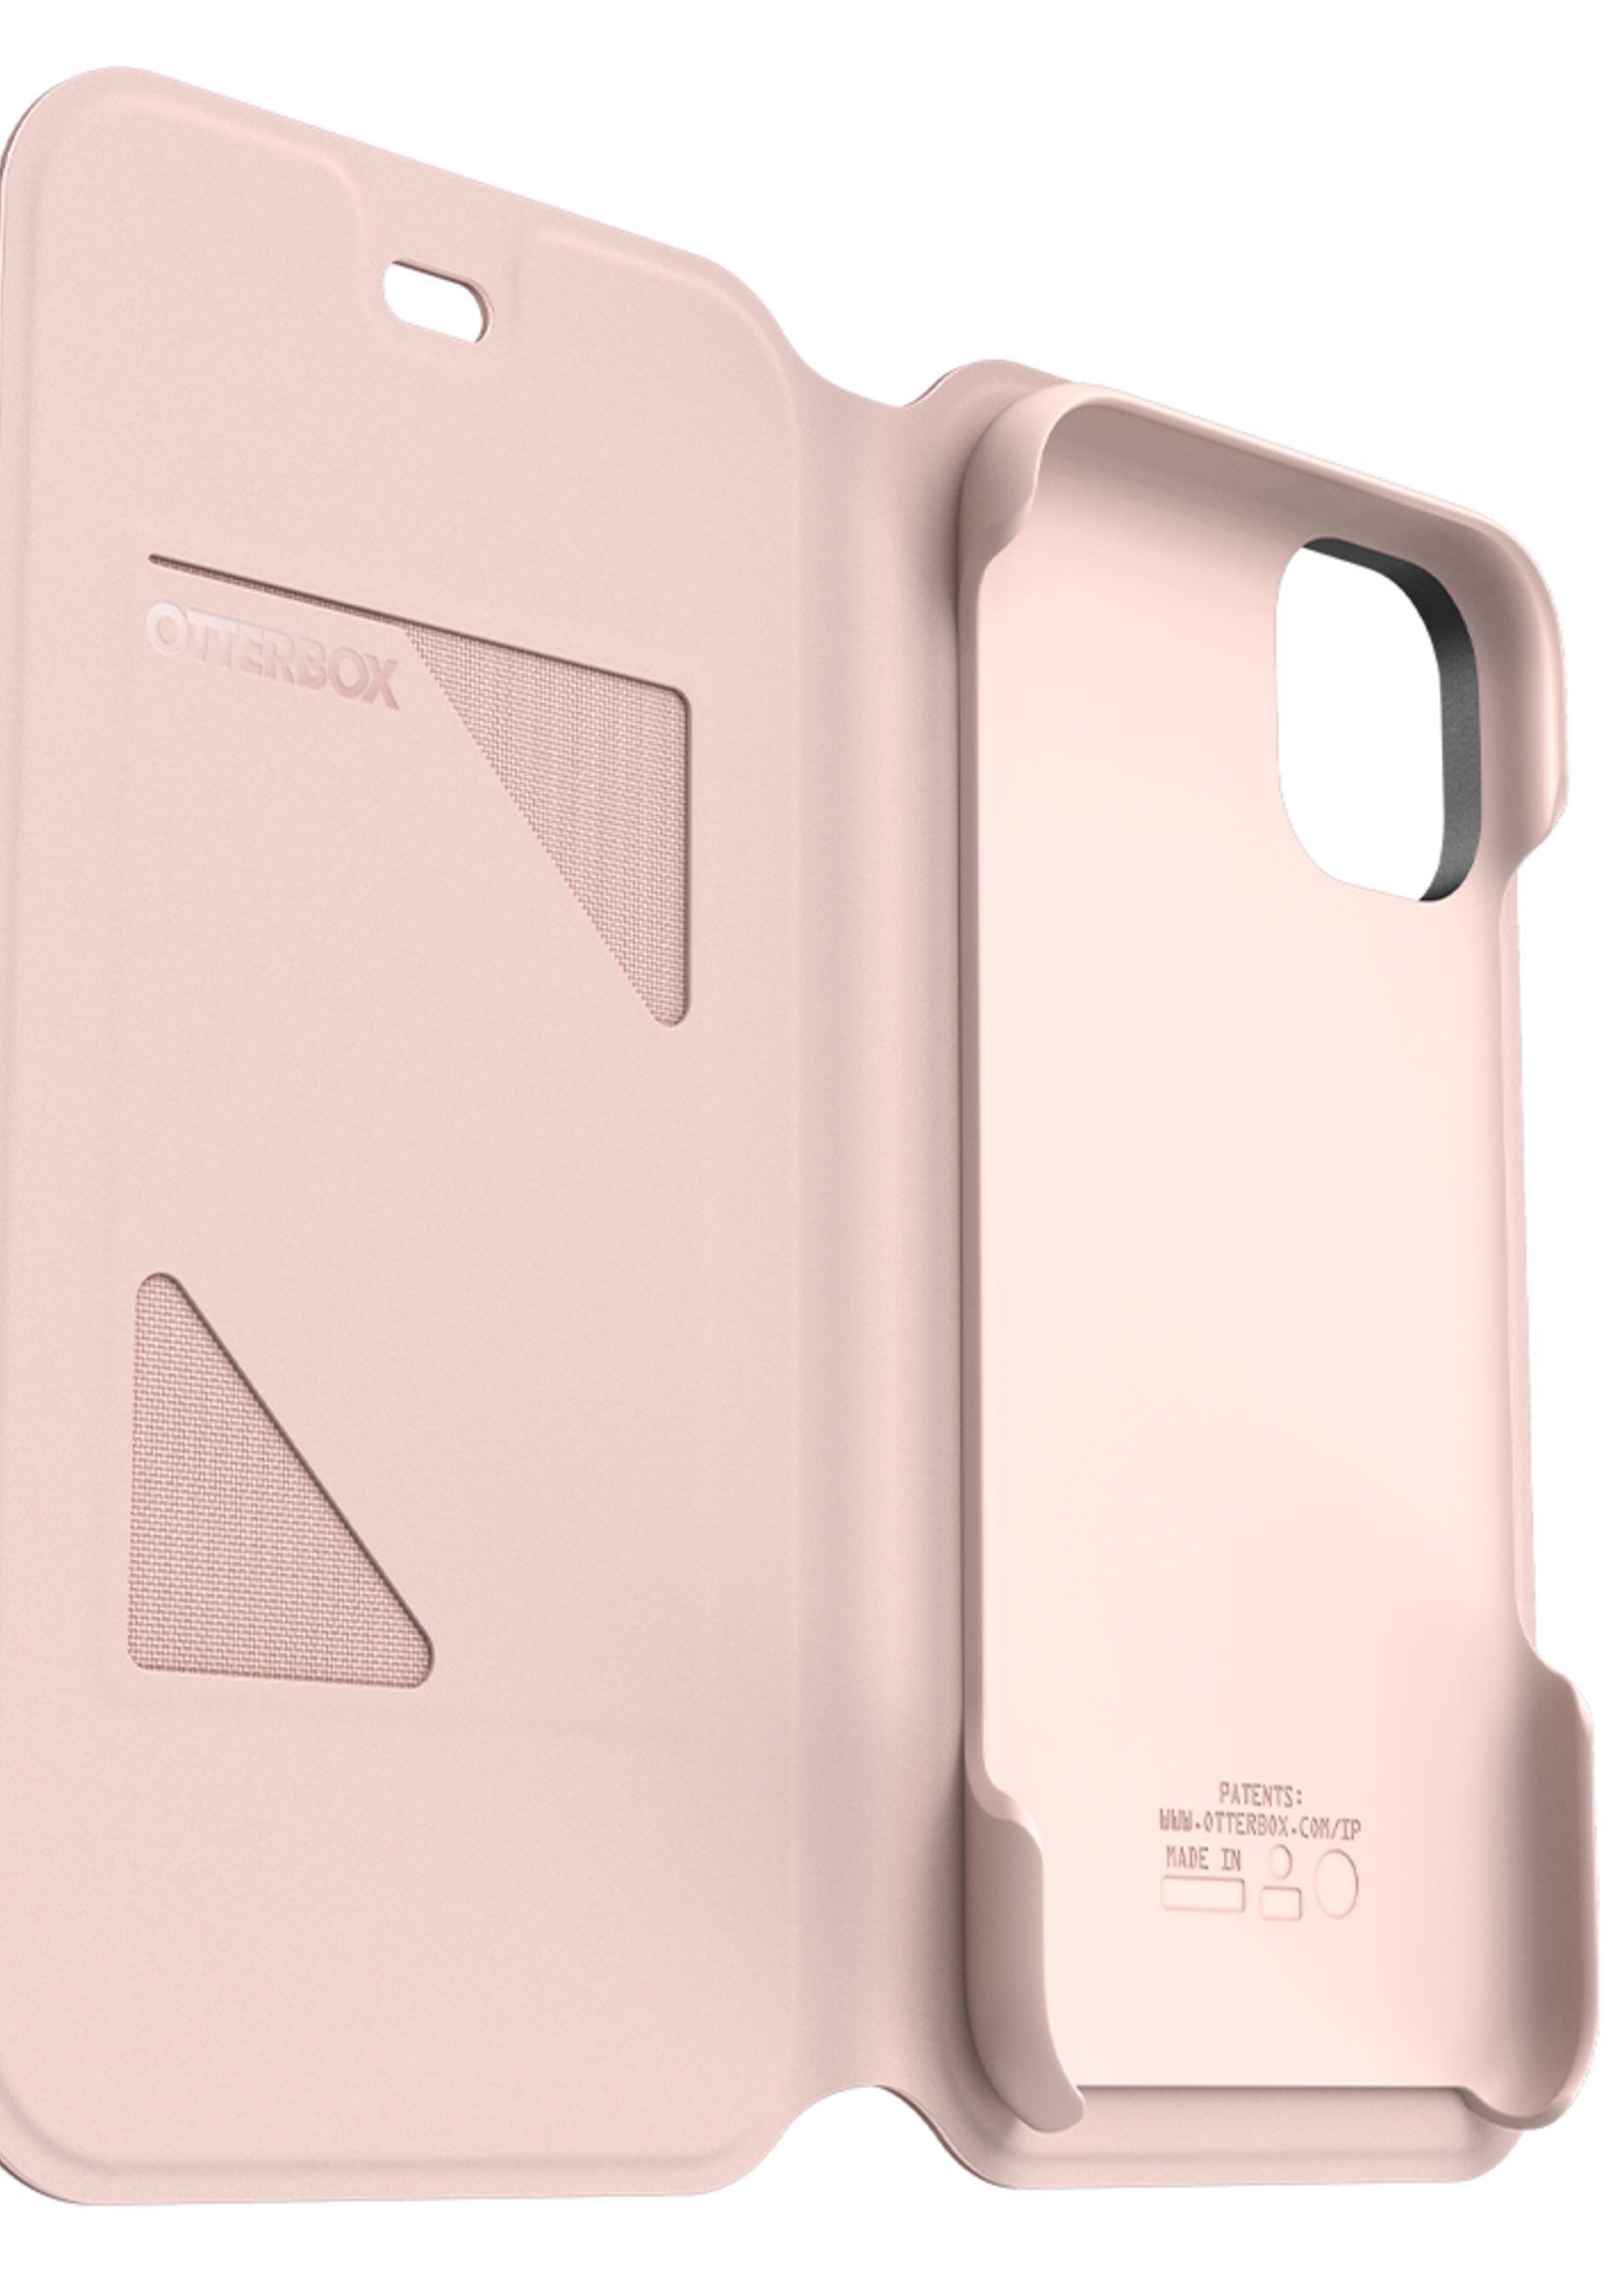 Otterbox OtterBox - Strada Via Case for Apple iPhone 11 - Pink Shimmer